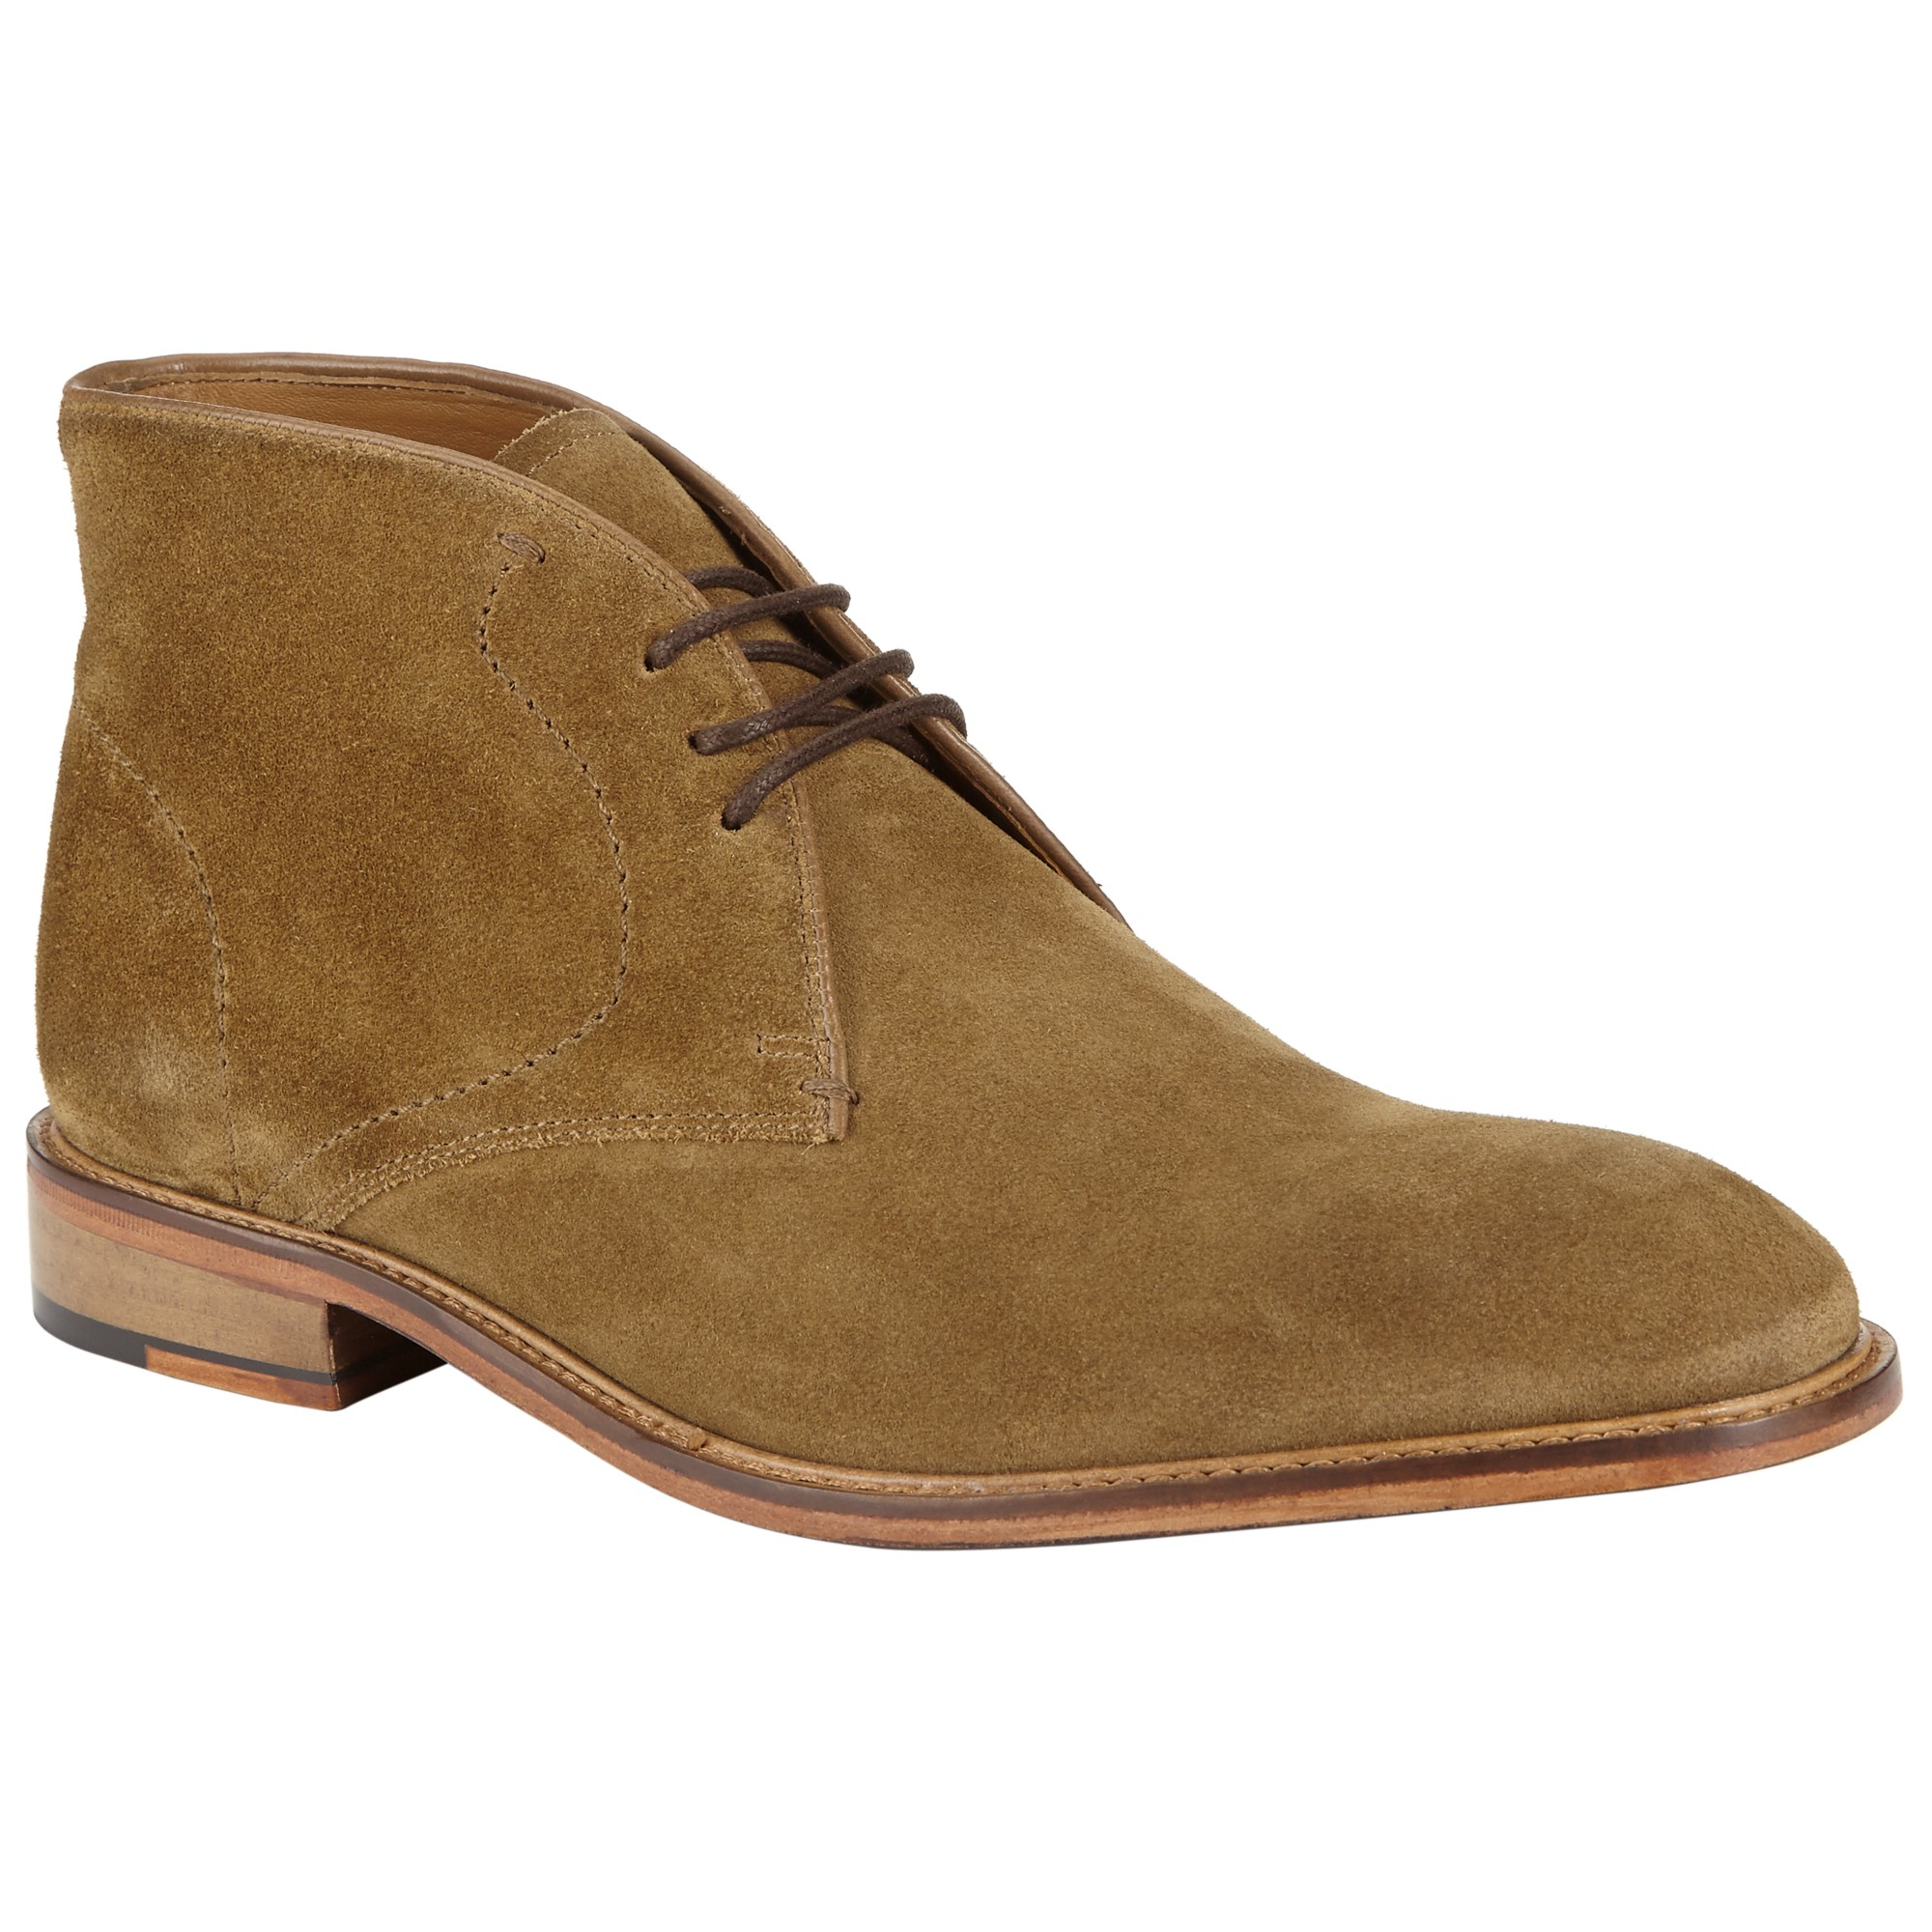 John Lewis Chumbley Suede Chukka Boots in Tan (Brown) for Men - Lyst